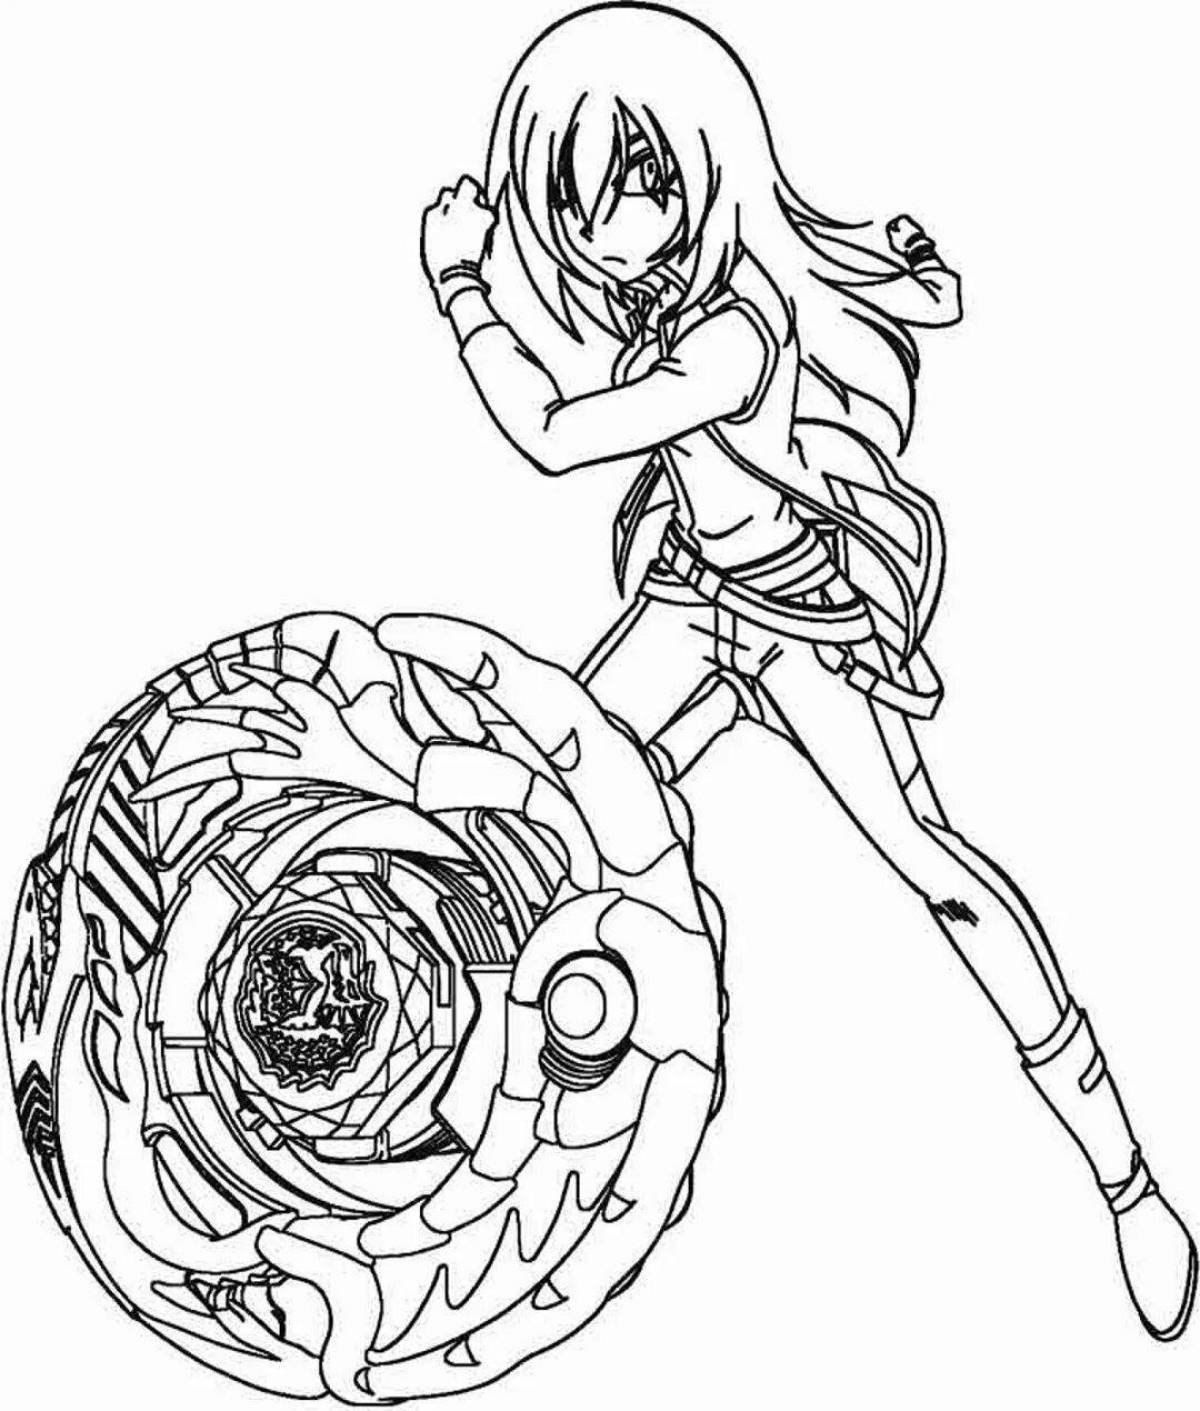 Glowing beyblade burst coloring page